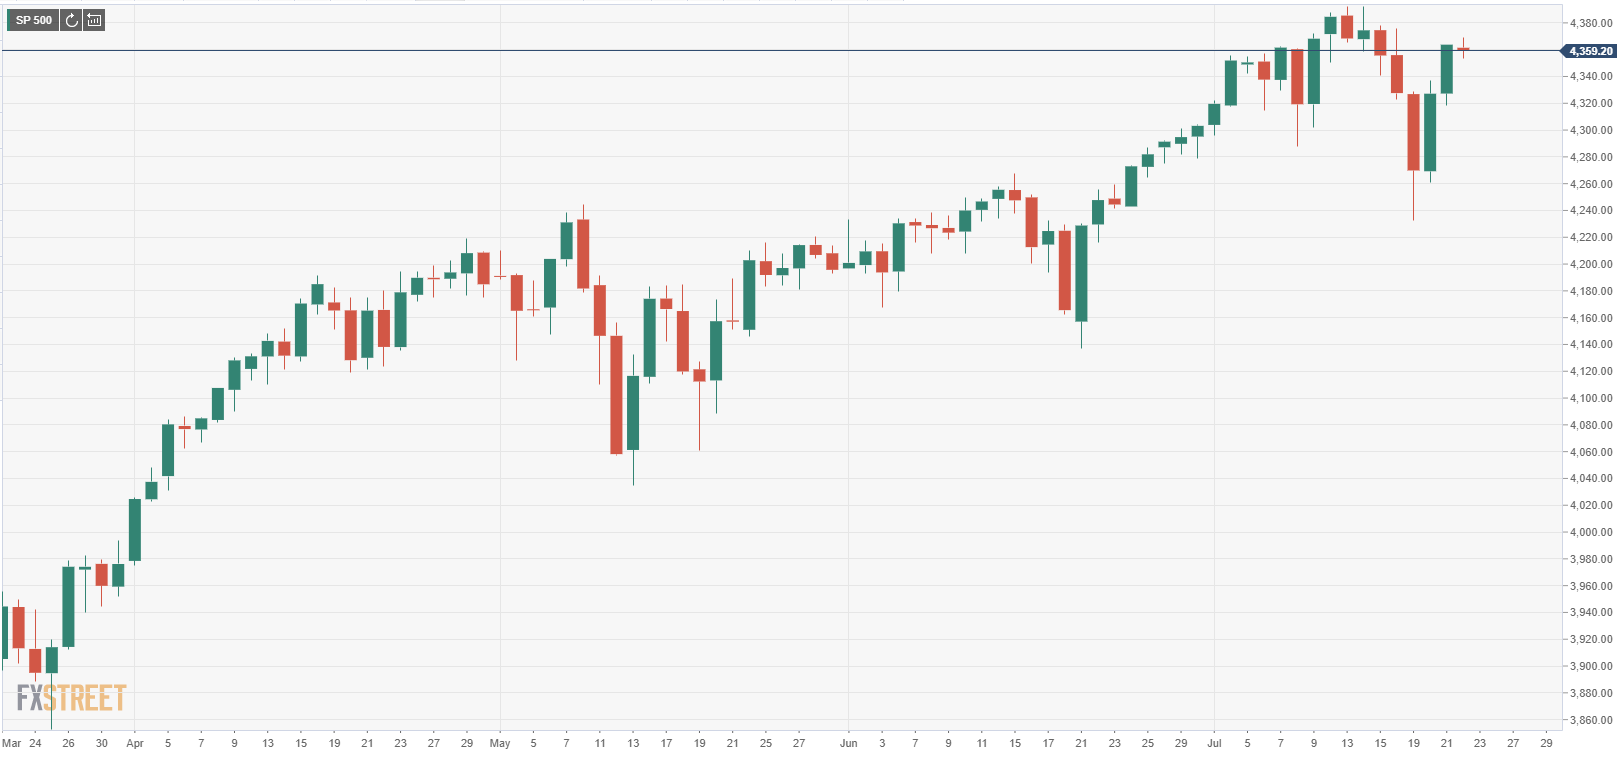 S&P 500 Index opens sideways after two-day rally